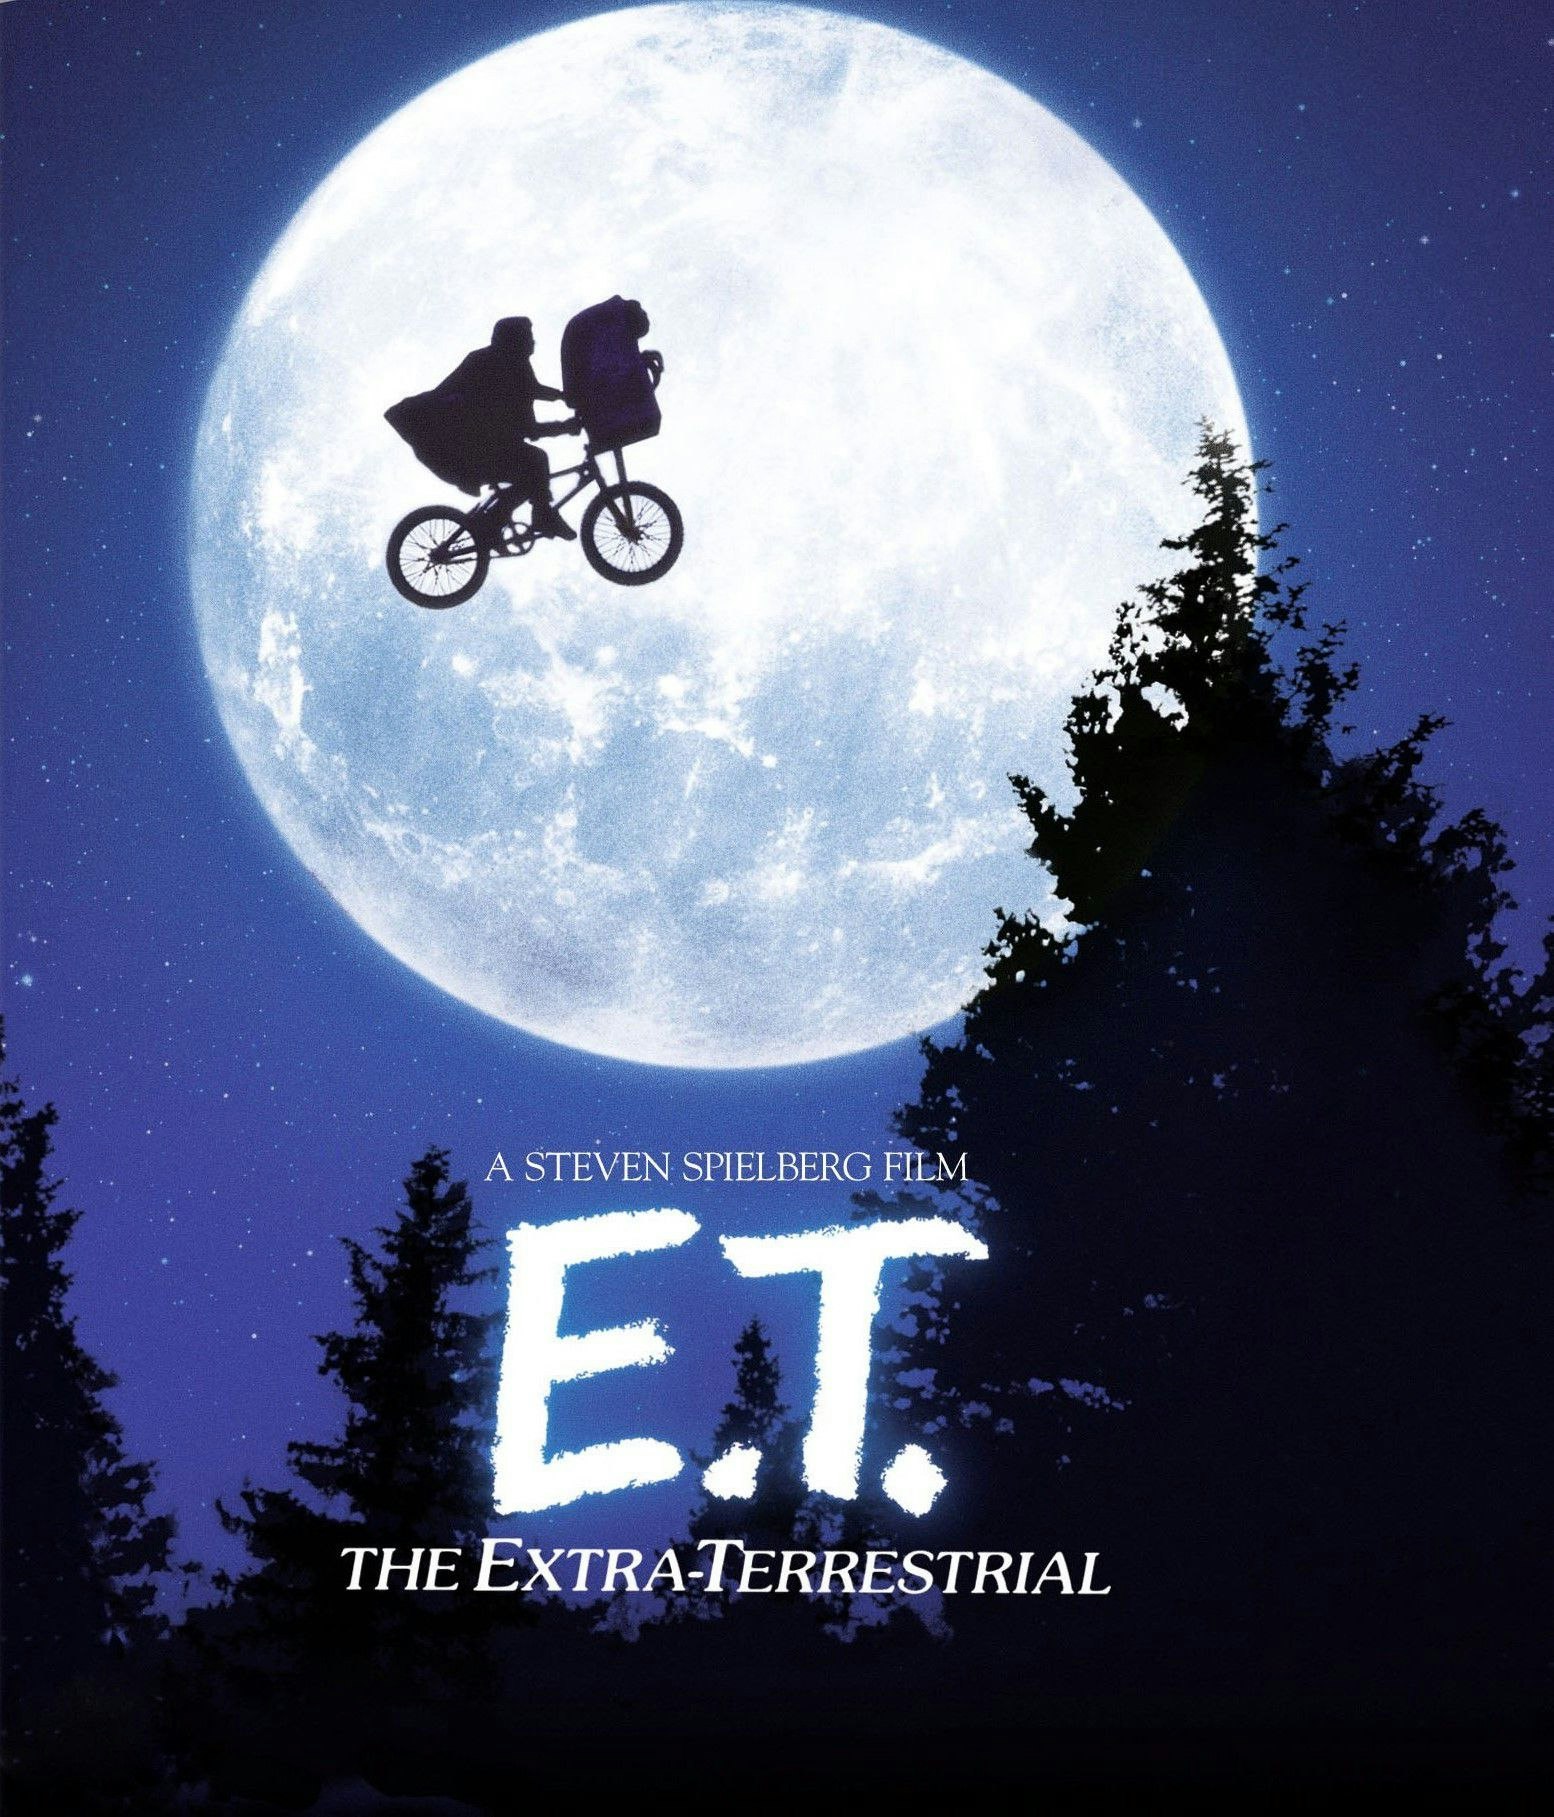 Worldwide release of the film E.T.